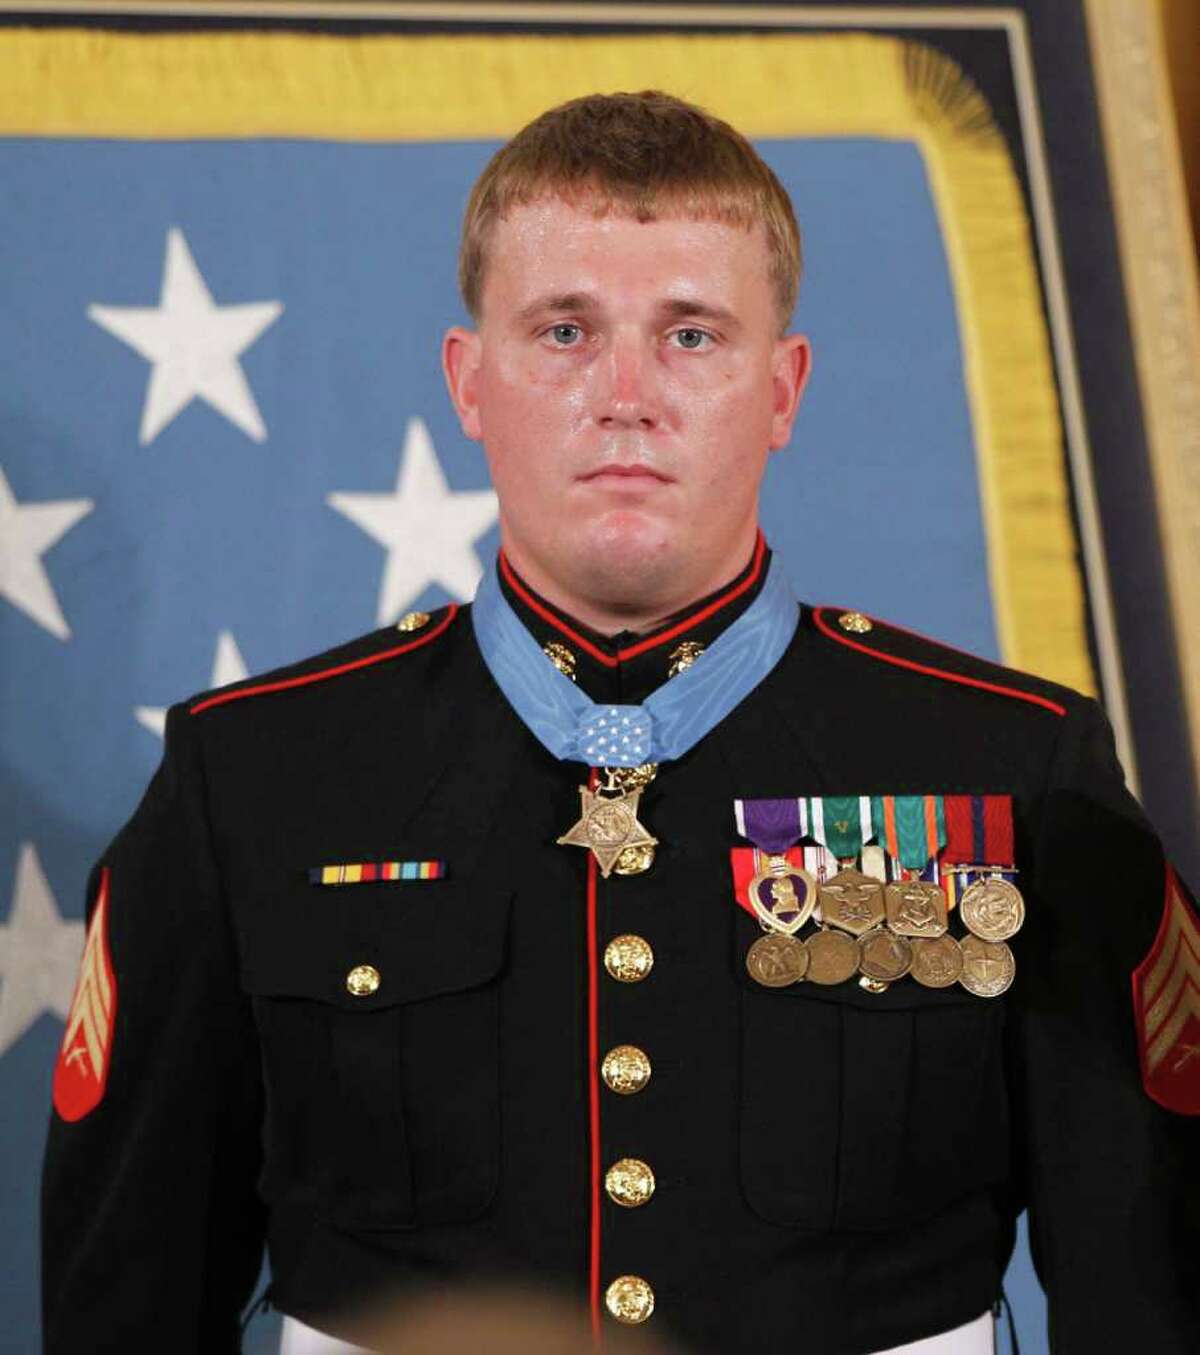 In this Sept. 15, 2010 file photo, Medal of Honor recipient, former U.S. Marine Sgt. Dakota Meyer, wears his medal after it was awarded to him by President Barack Obama, during a ceremony in the East Room of the White House in Washington.